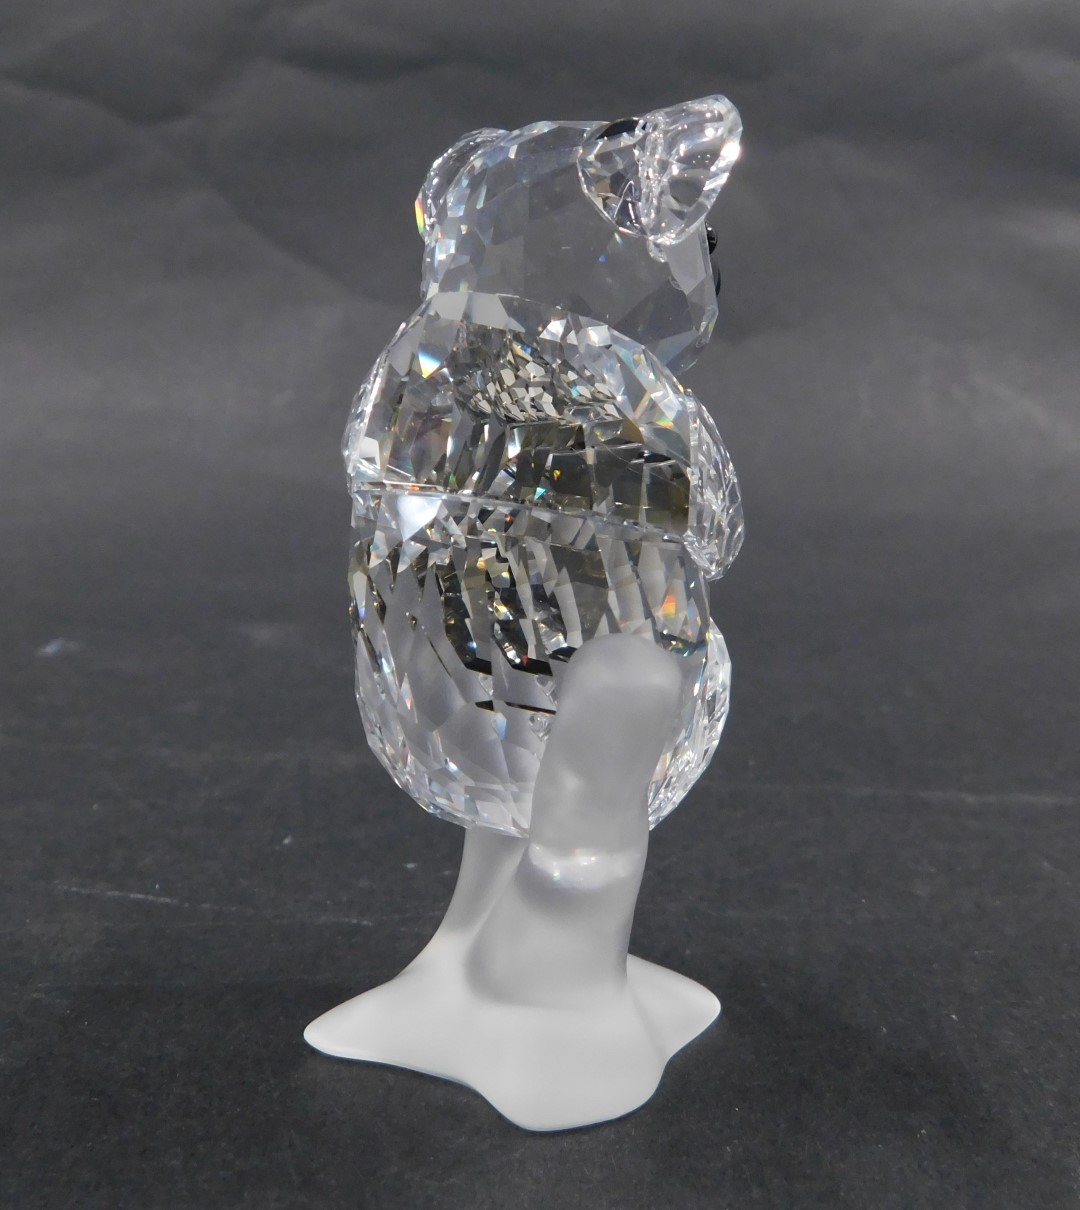 A Swarovski crystal figure group of two koala bears, mother and baby, perched on branch, with black - Image 3 of 3